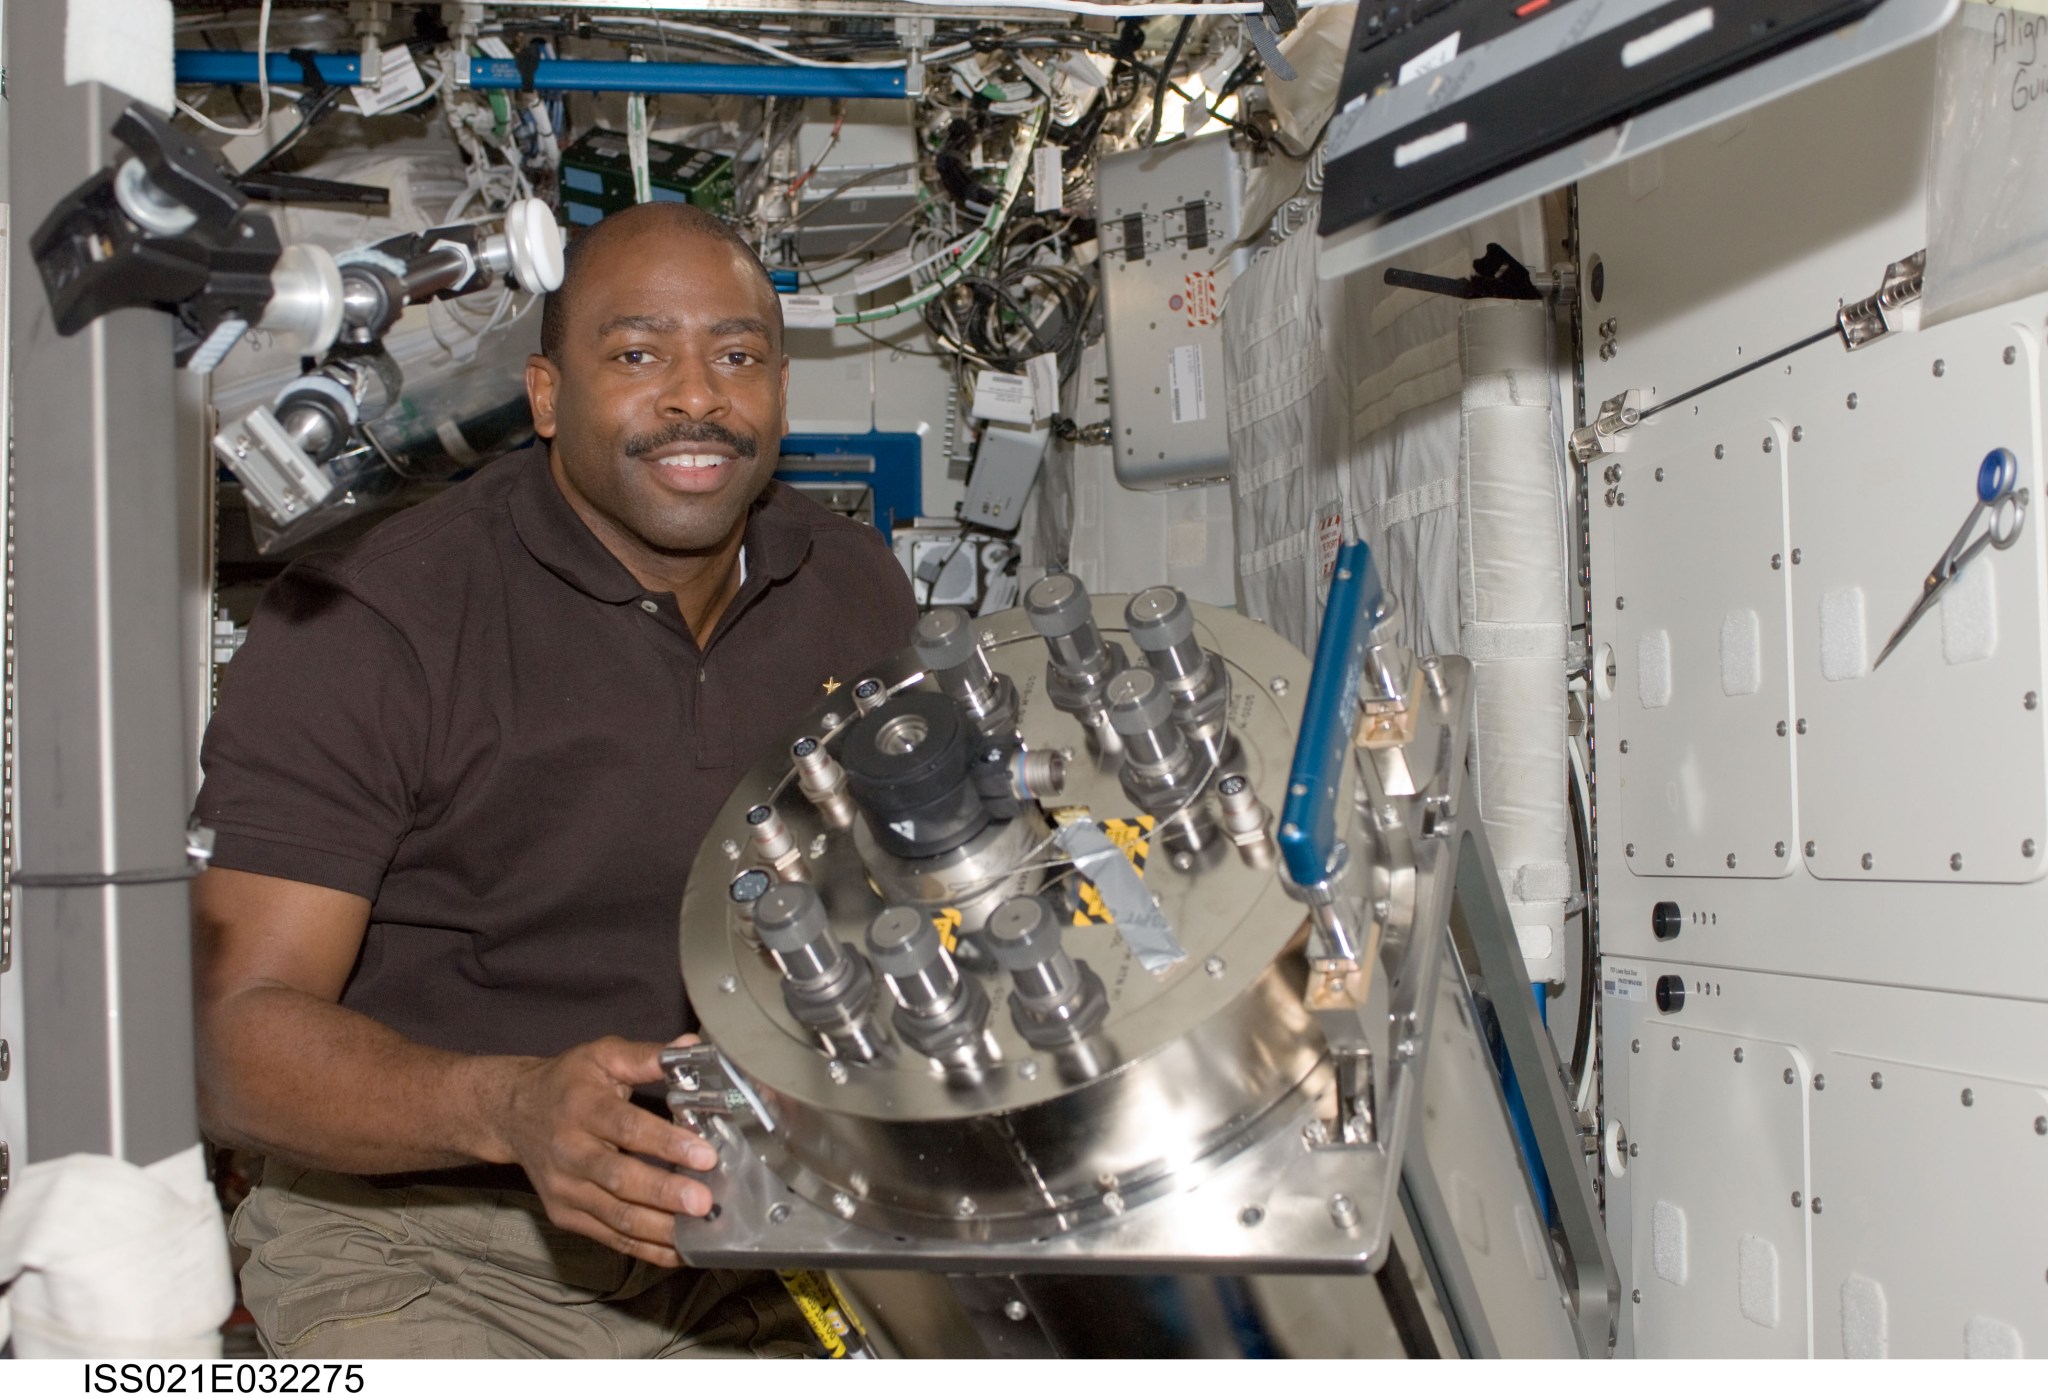 NASA astronaut Leland Melvin removed this early model of the Distillation Assembly from the Water Recovery System.